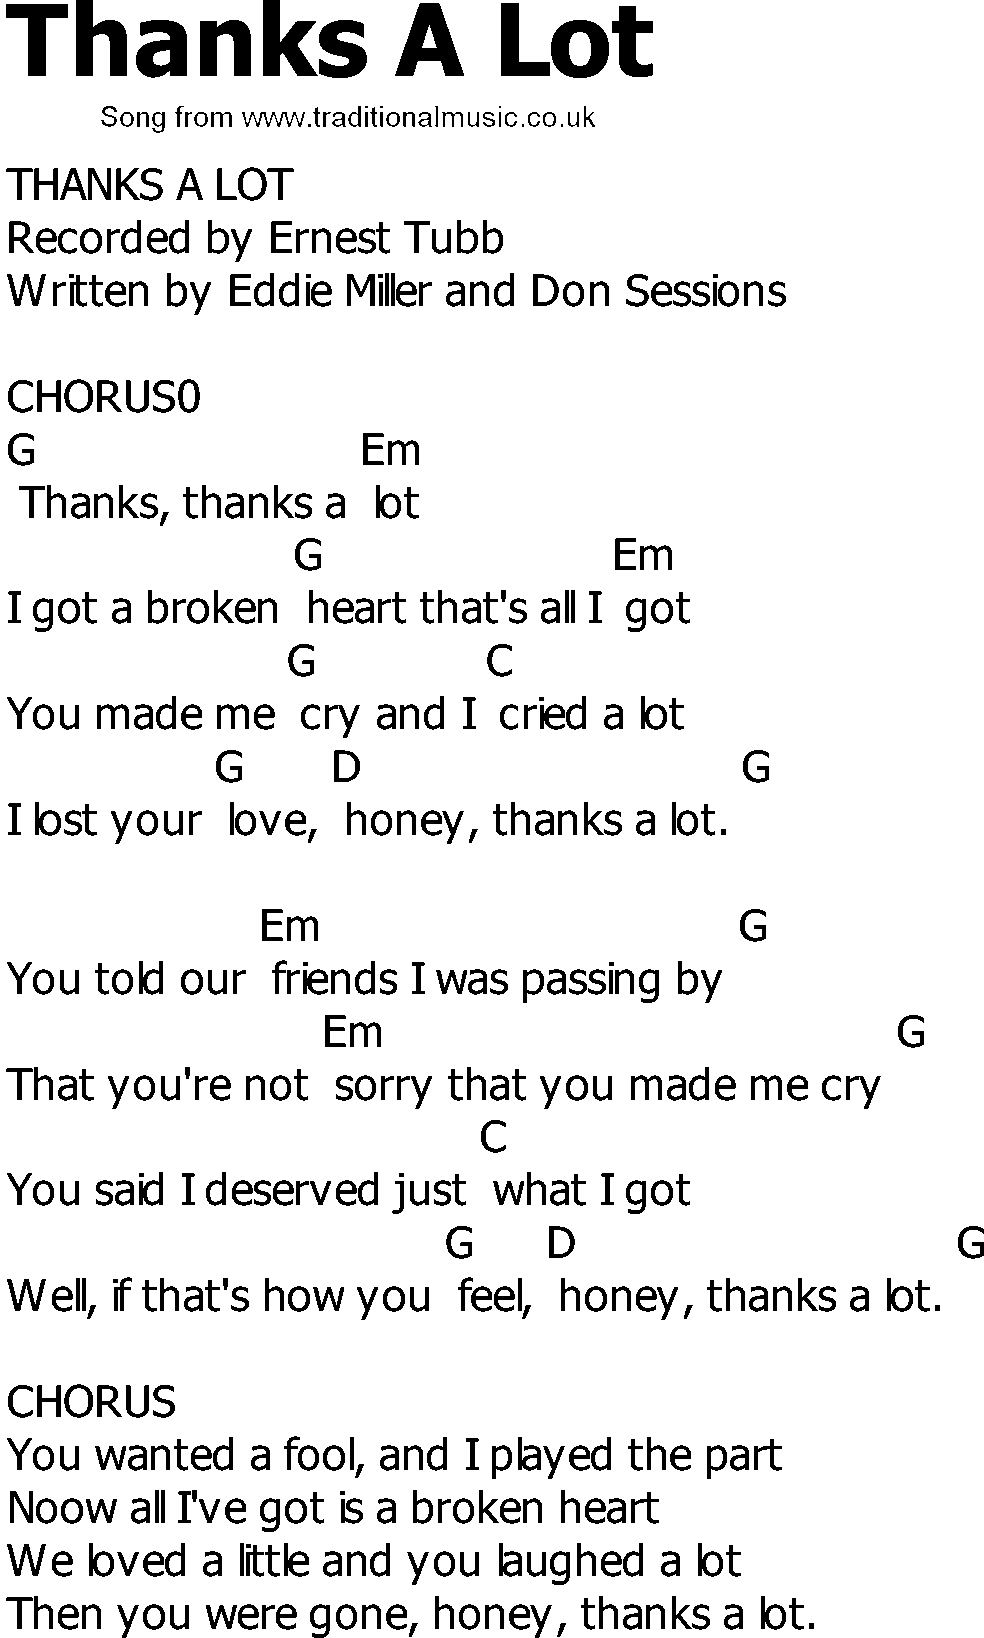 Old Country song lyrics with chords - Thanks A Lot